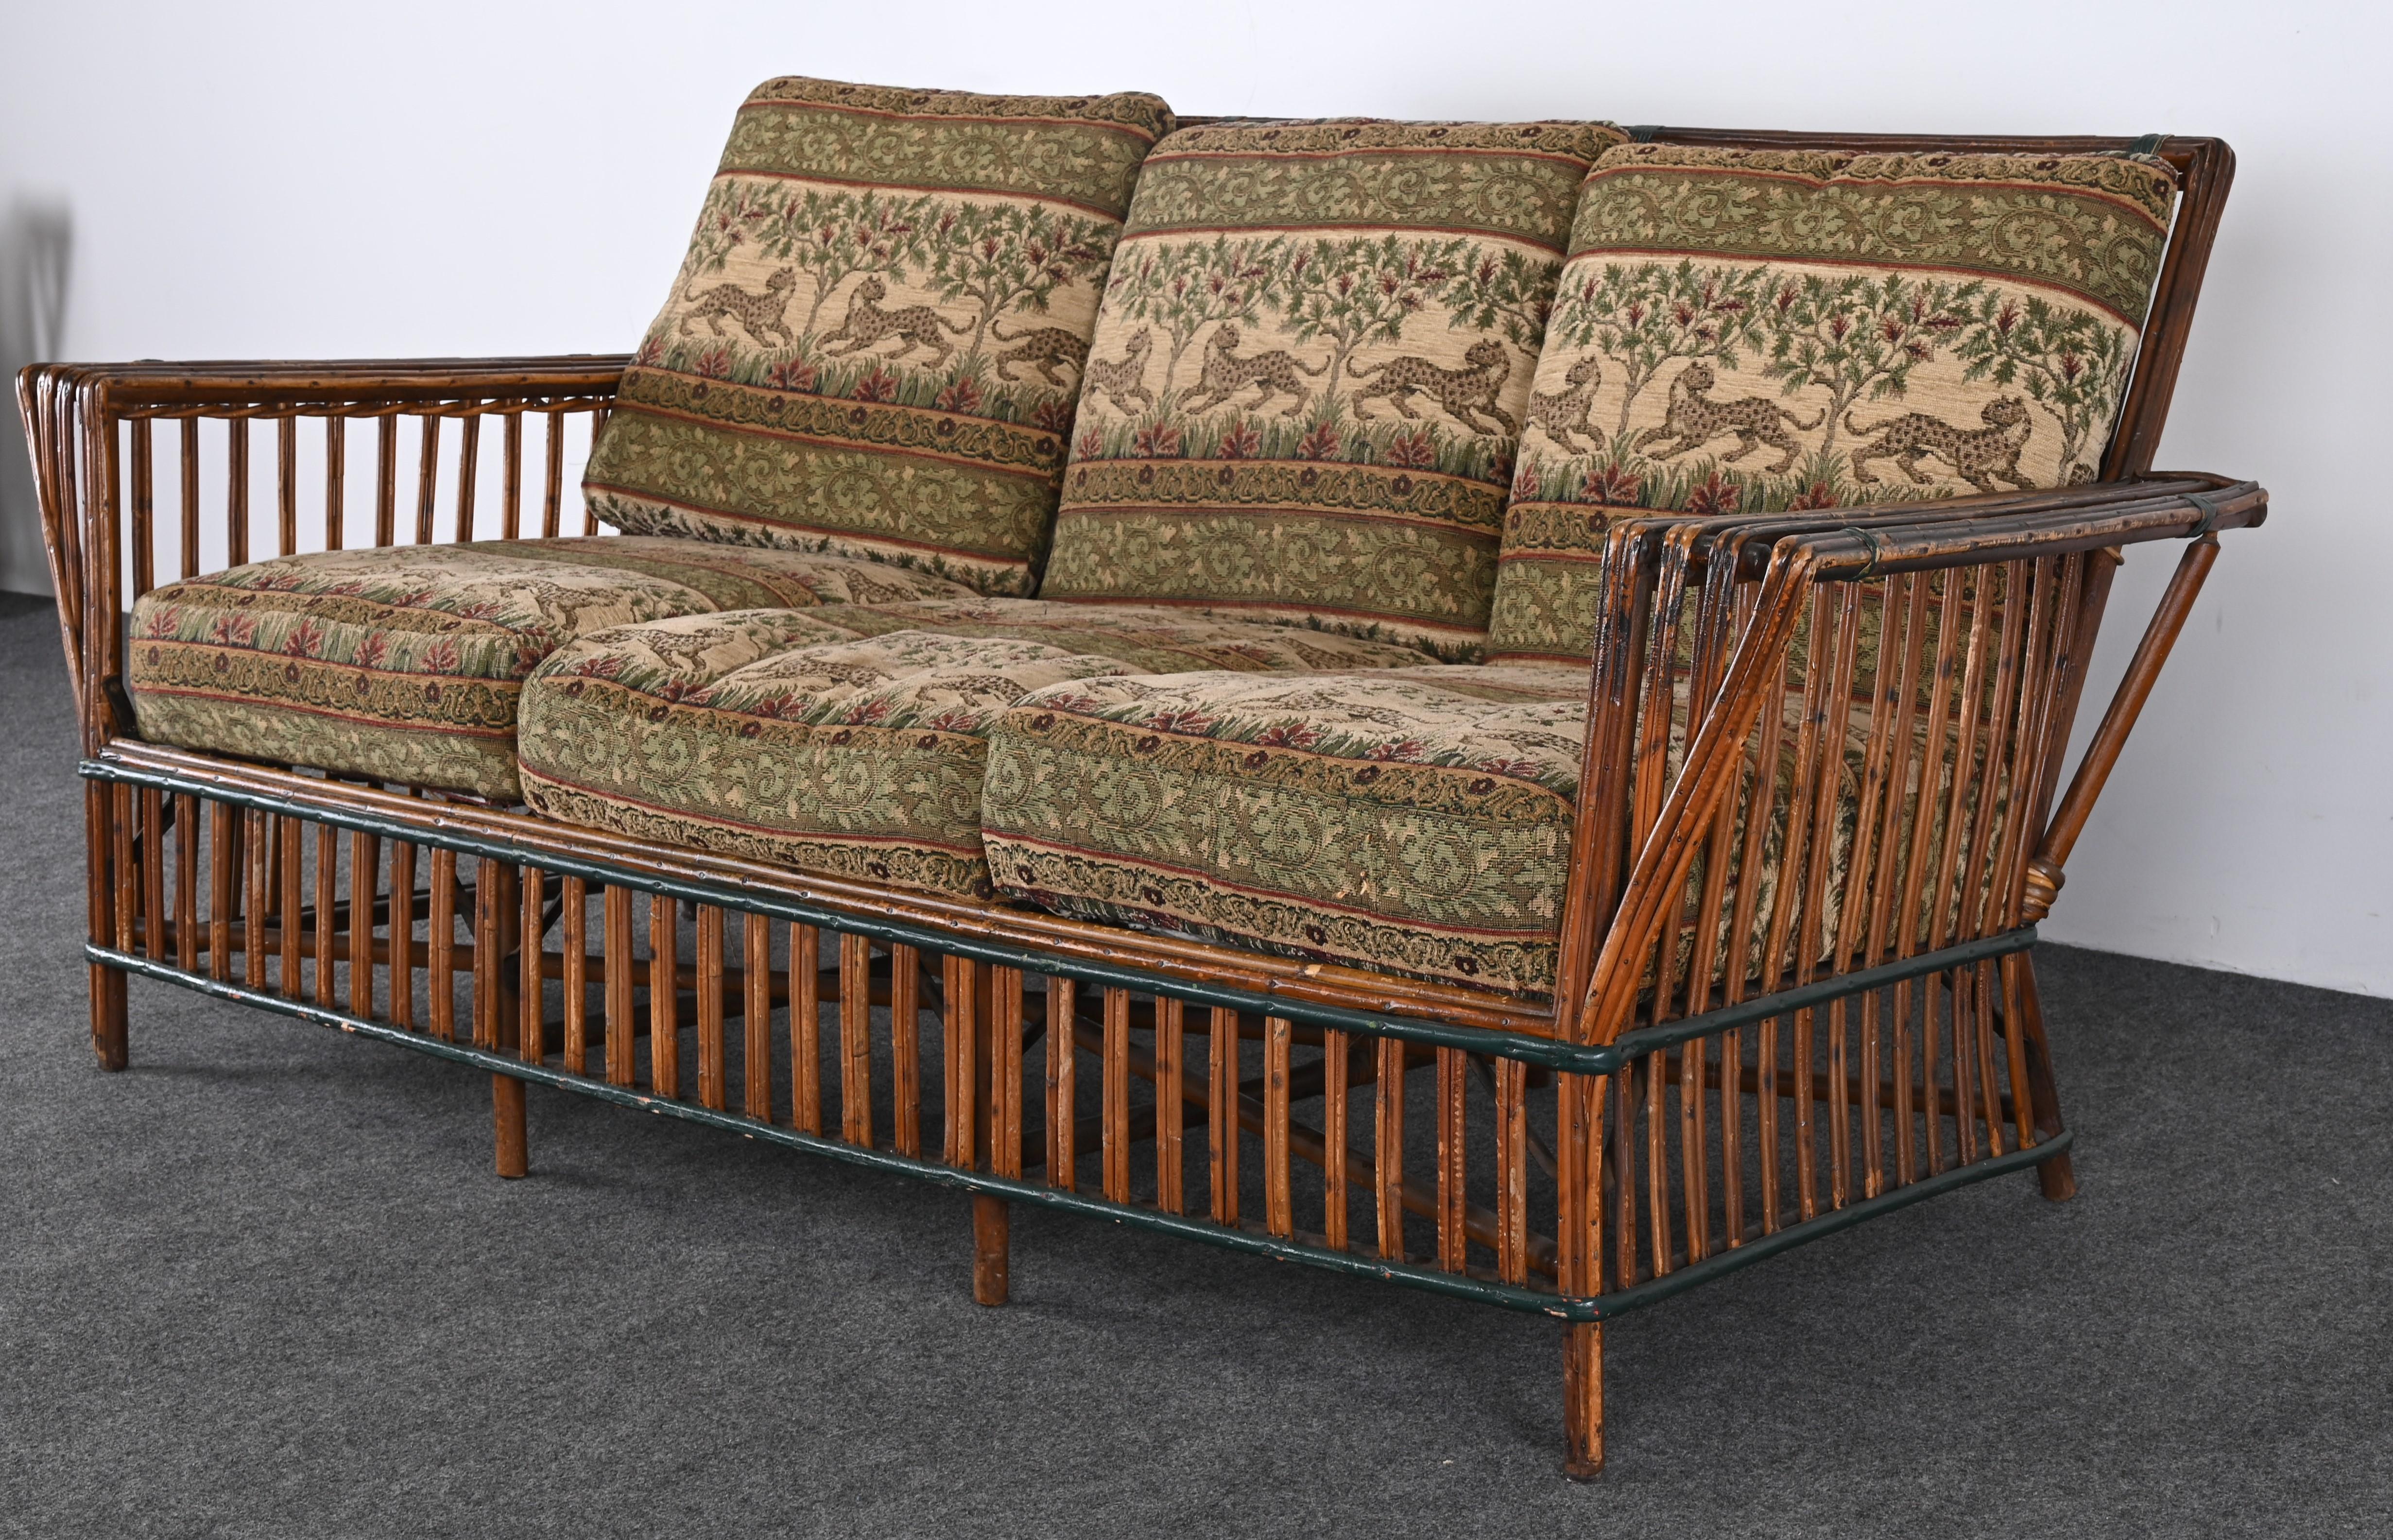 Art Deco Split Ypsilanti Stick Reed Wicker or Sofa with Pair Arm Chairs c. 1930s For Sale 12